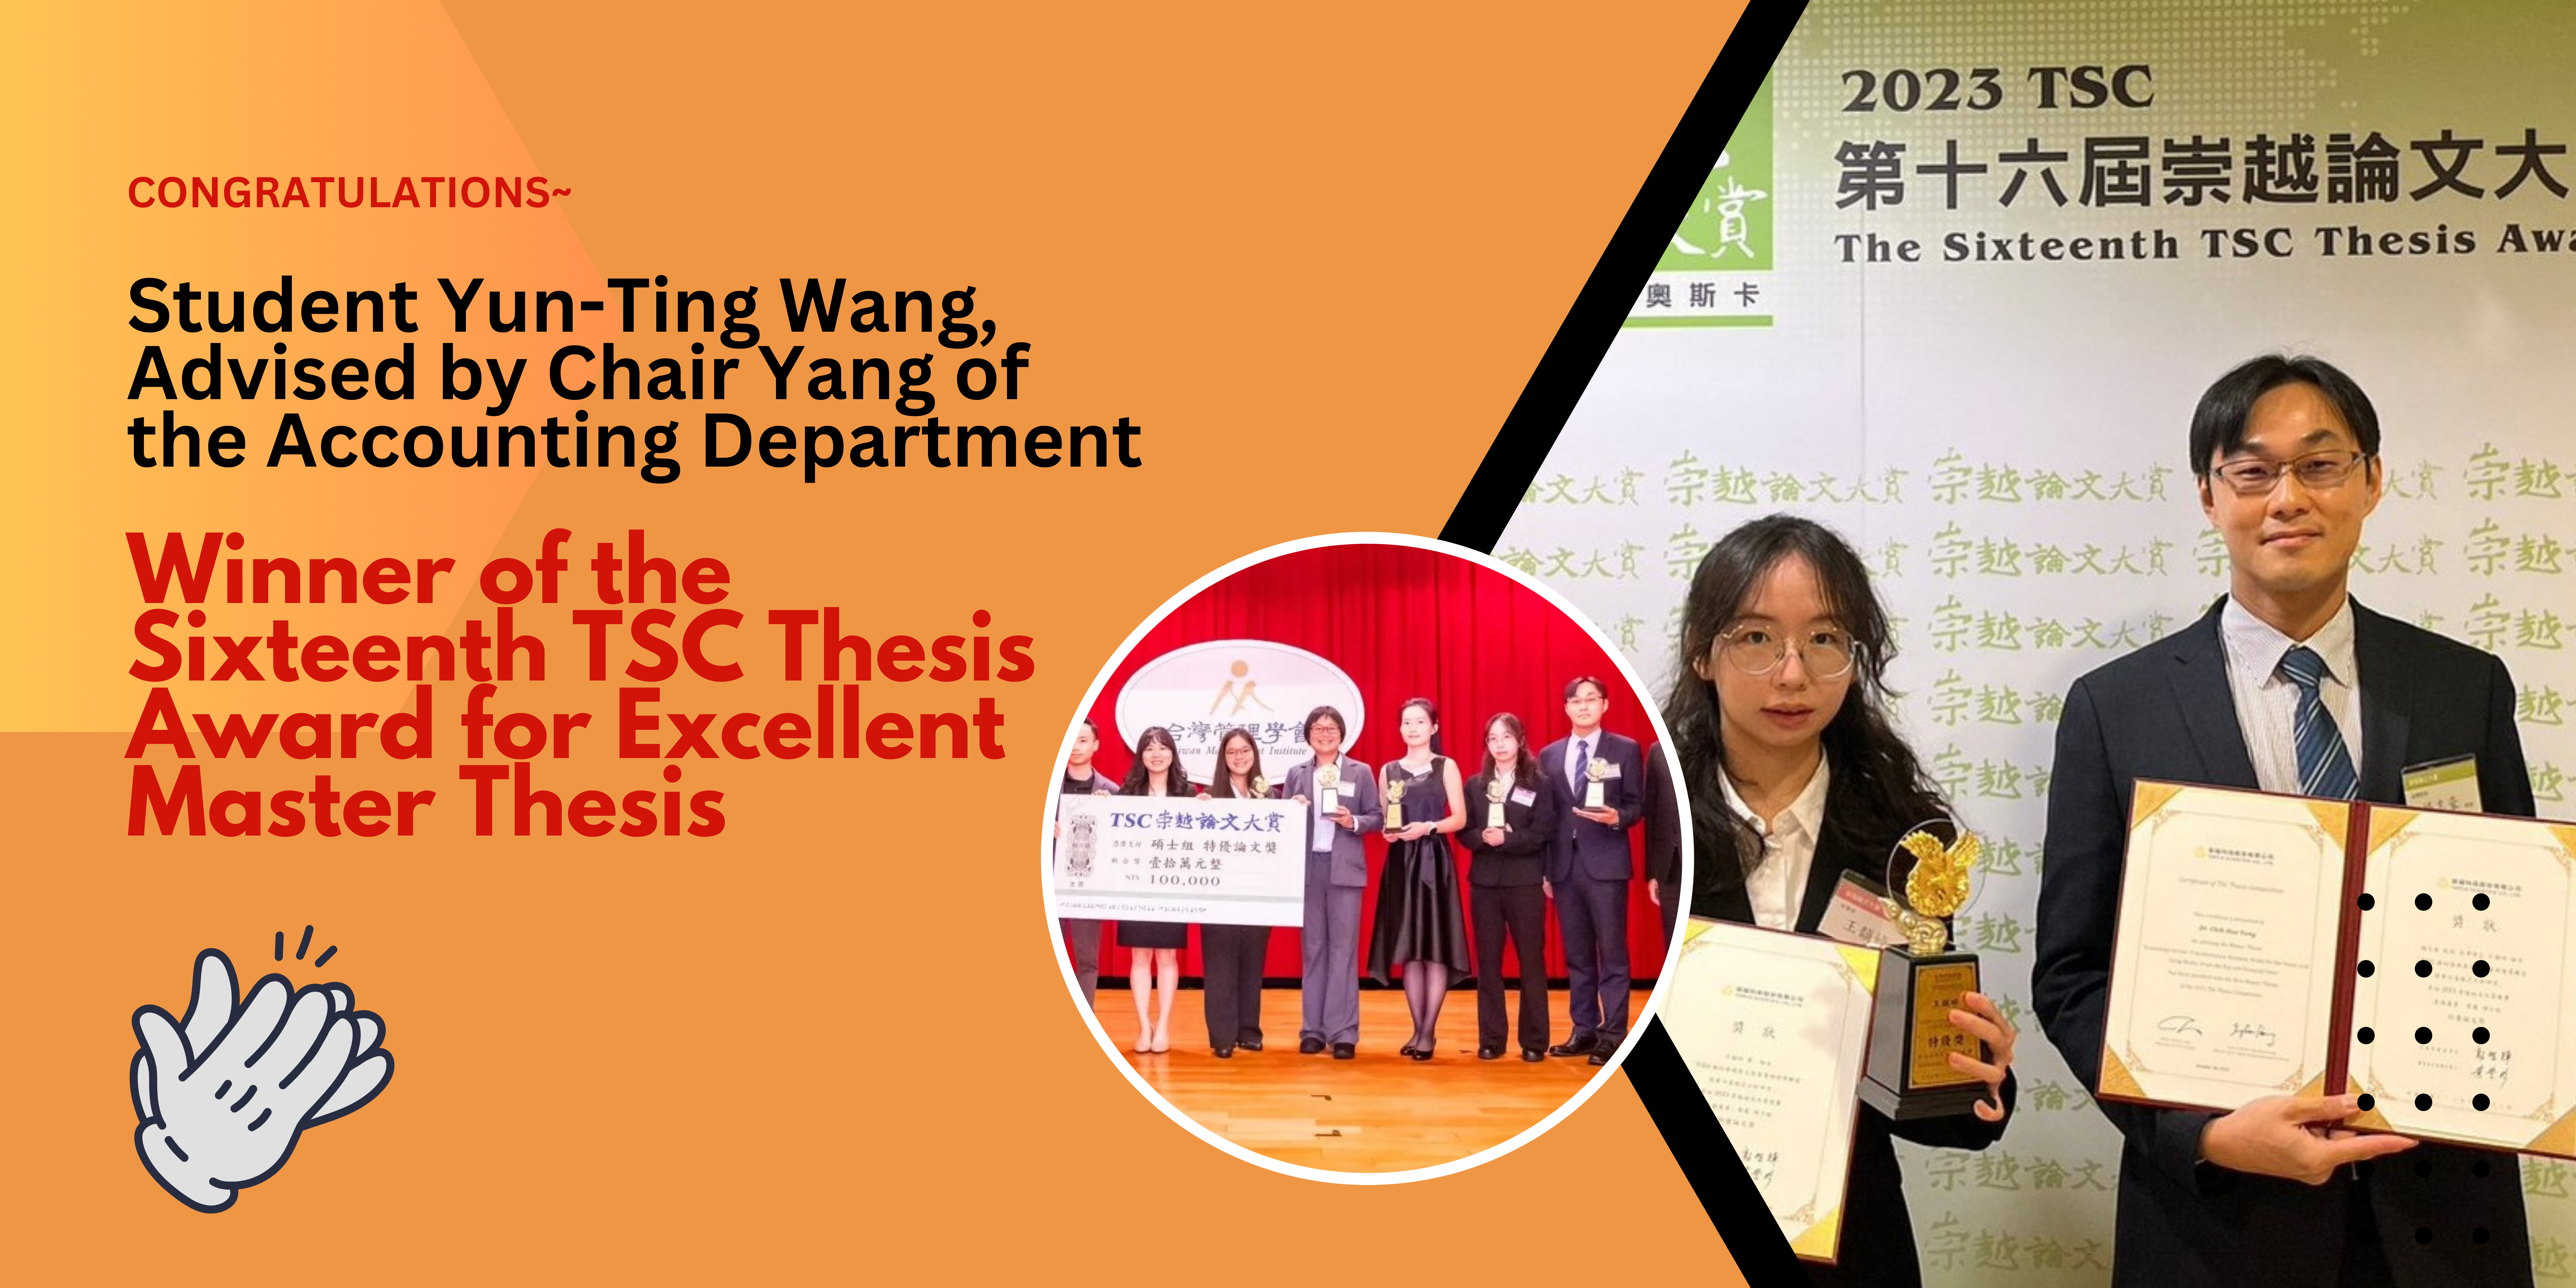 Featured image for “Congratulations to Yun-Ting Wang, Advised by Chair Yang of Accounting Department, MCU, for Winning the Excellent Master Thesis Award from the Sixteenth TSC Thesis Award”